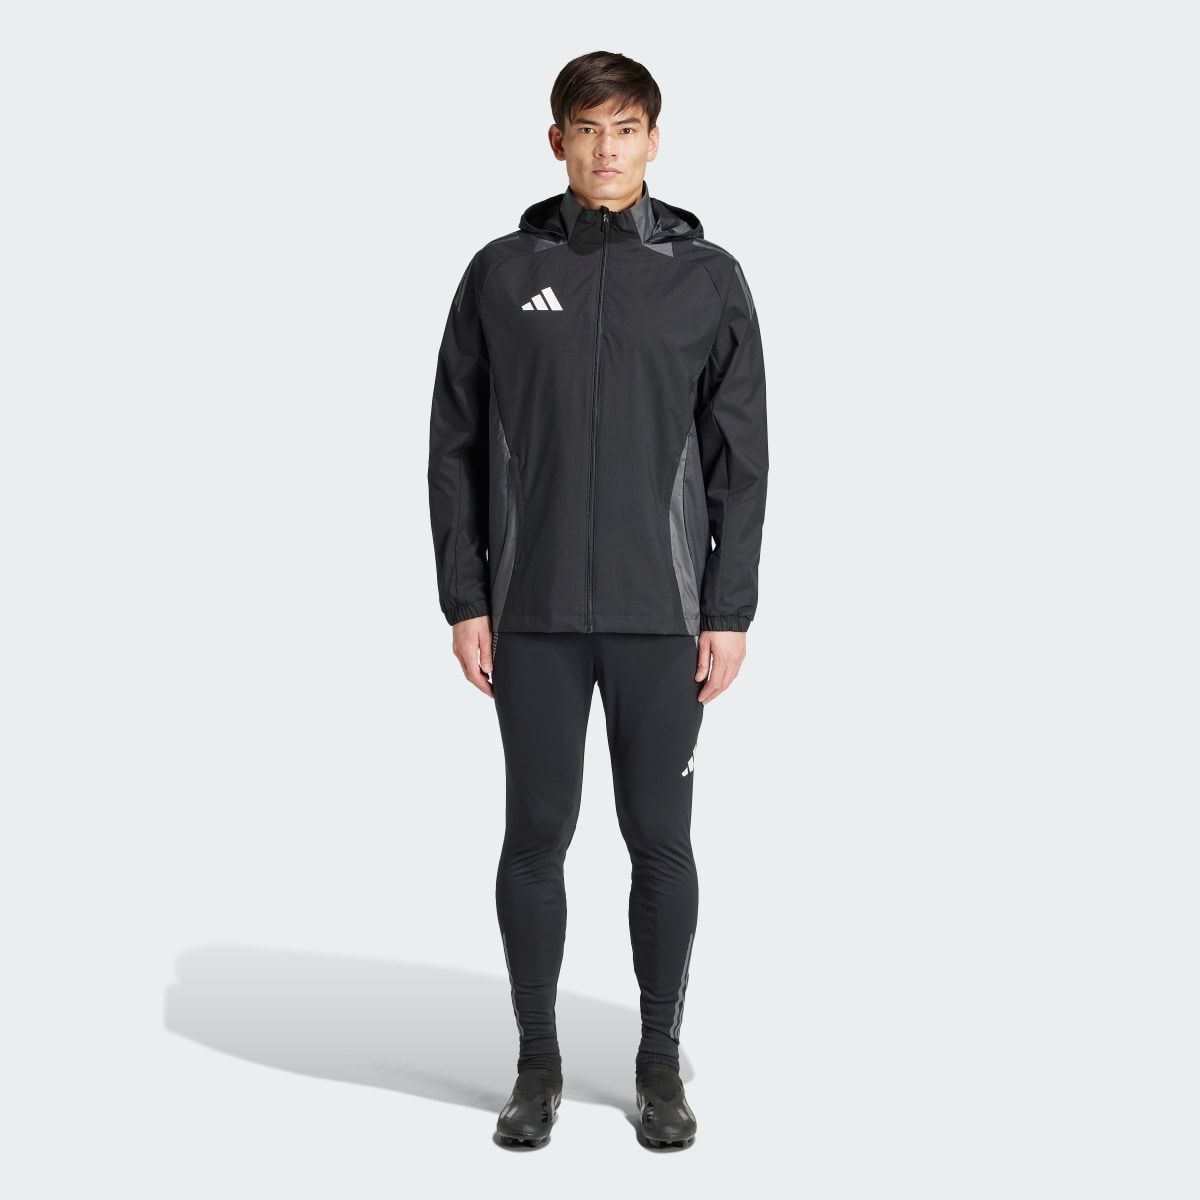 Adidas Tiro 24 Competition All-Weather Jacket. 6